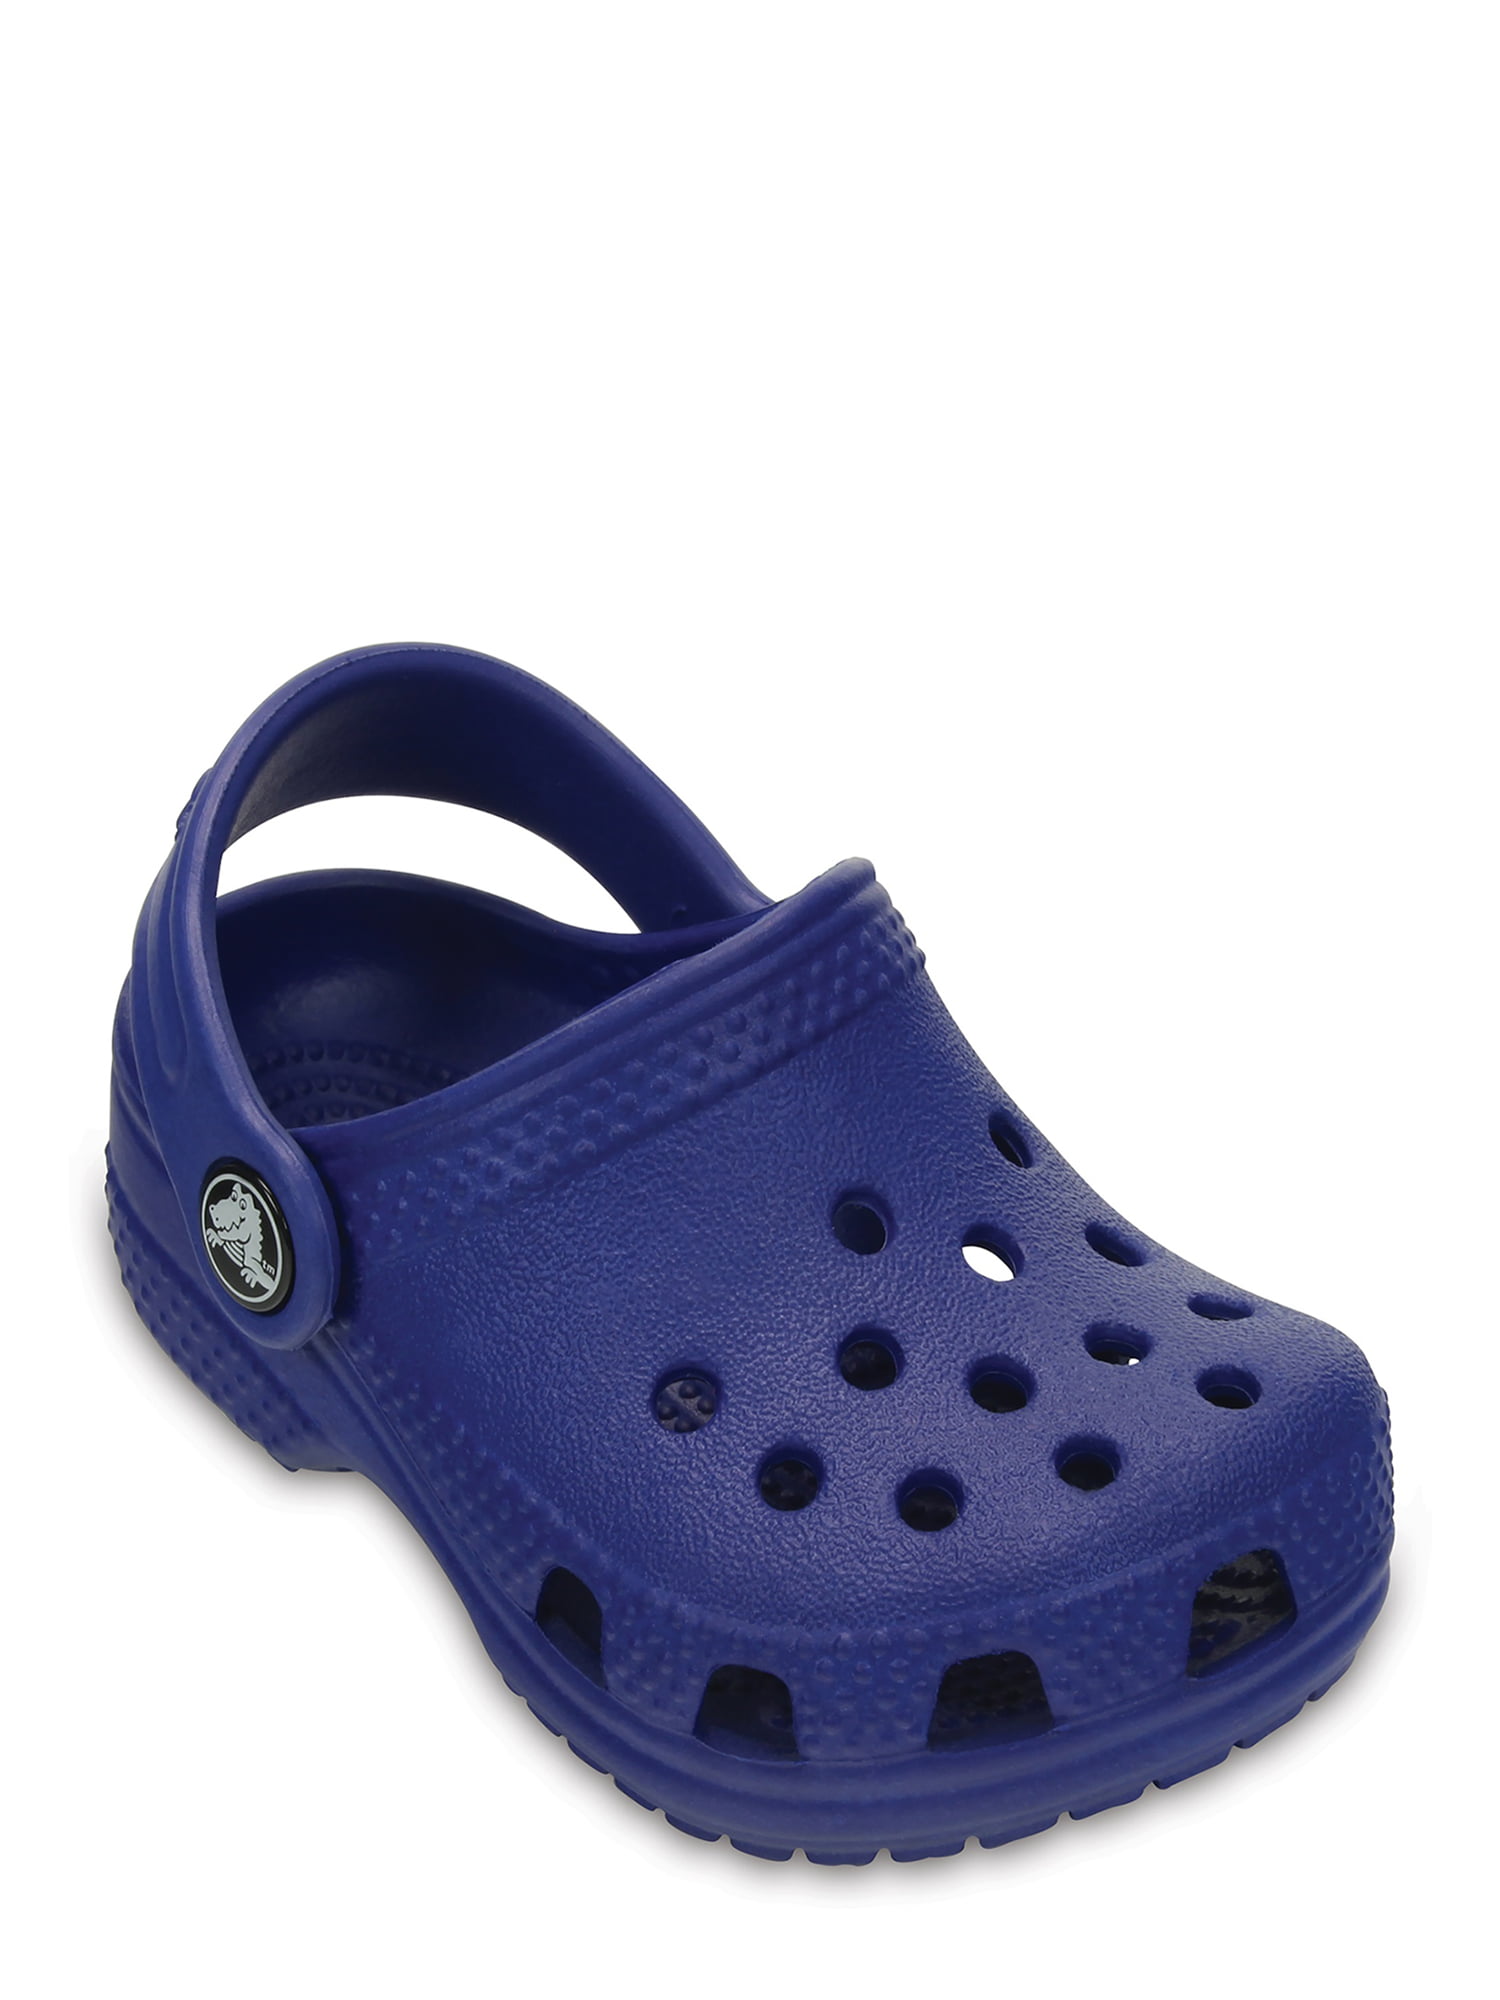 where to get crocs from